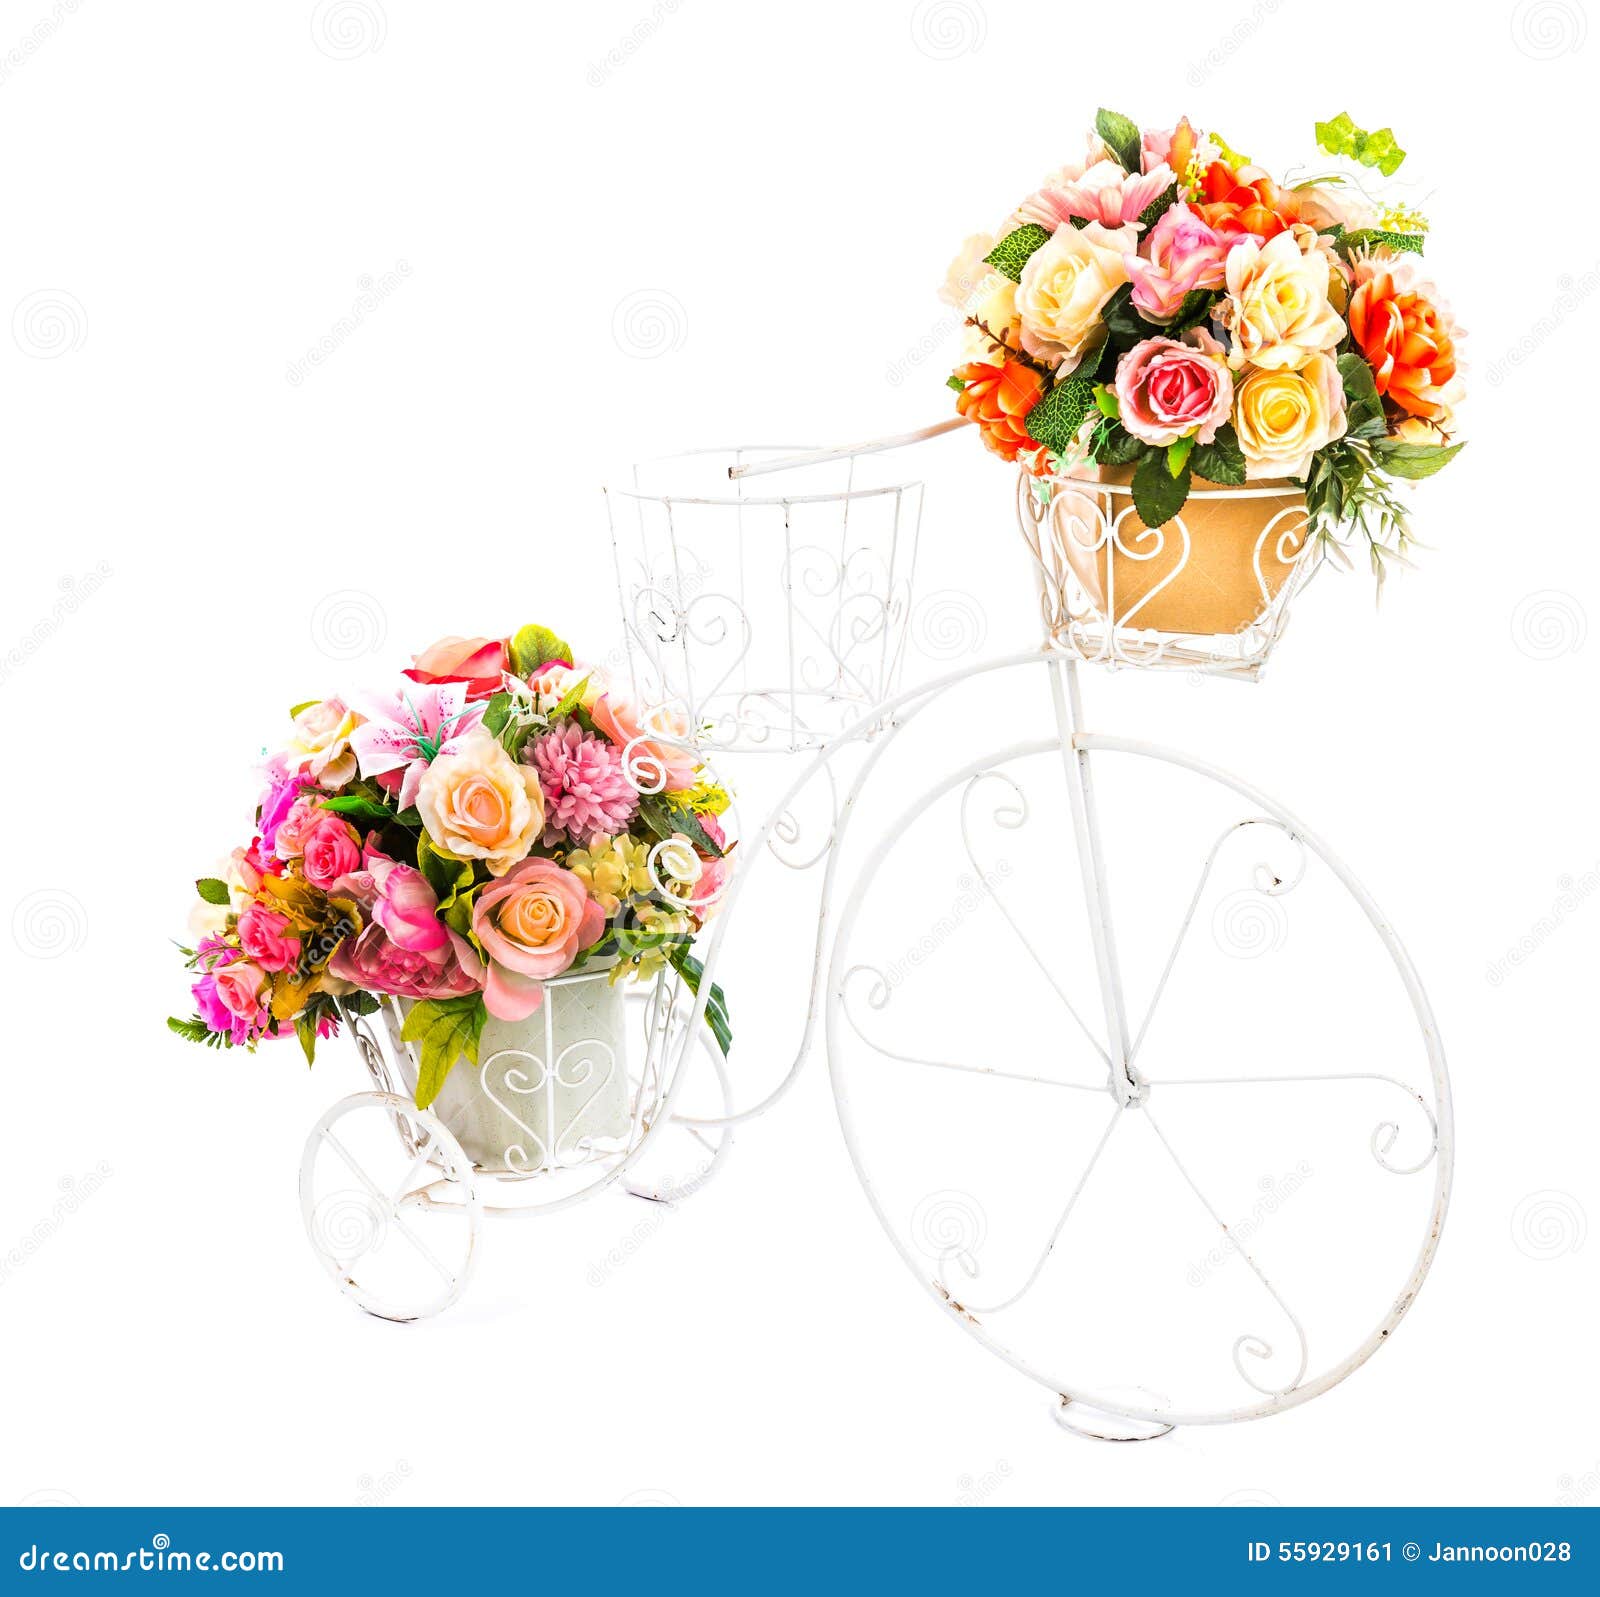 Decoration Artificial Flower Stock Image - Image of home, fragrant